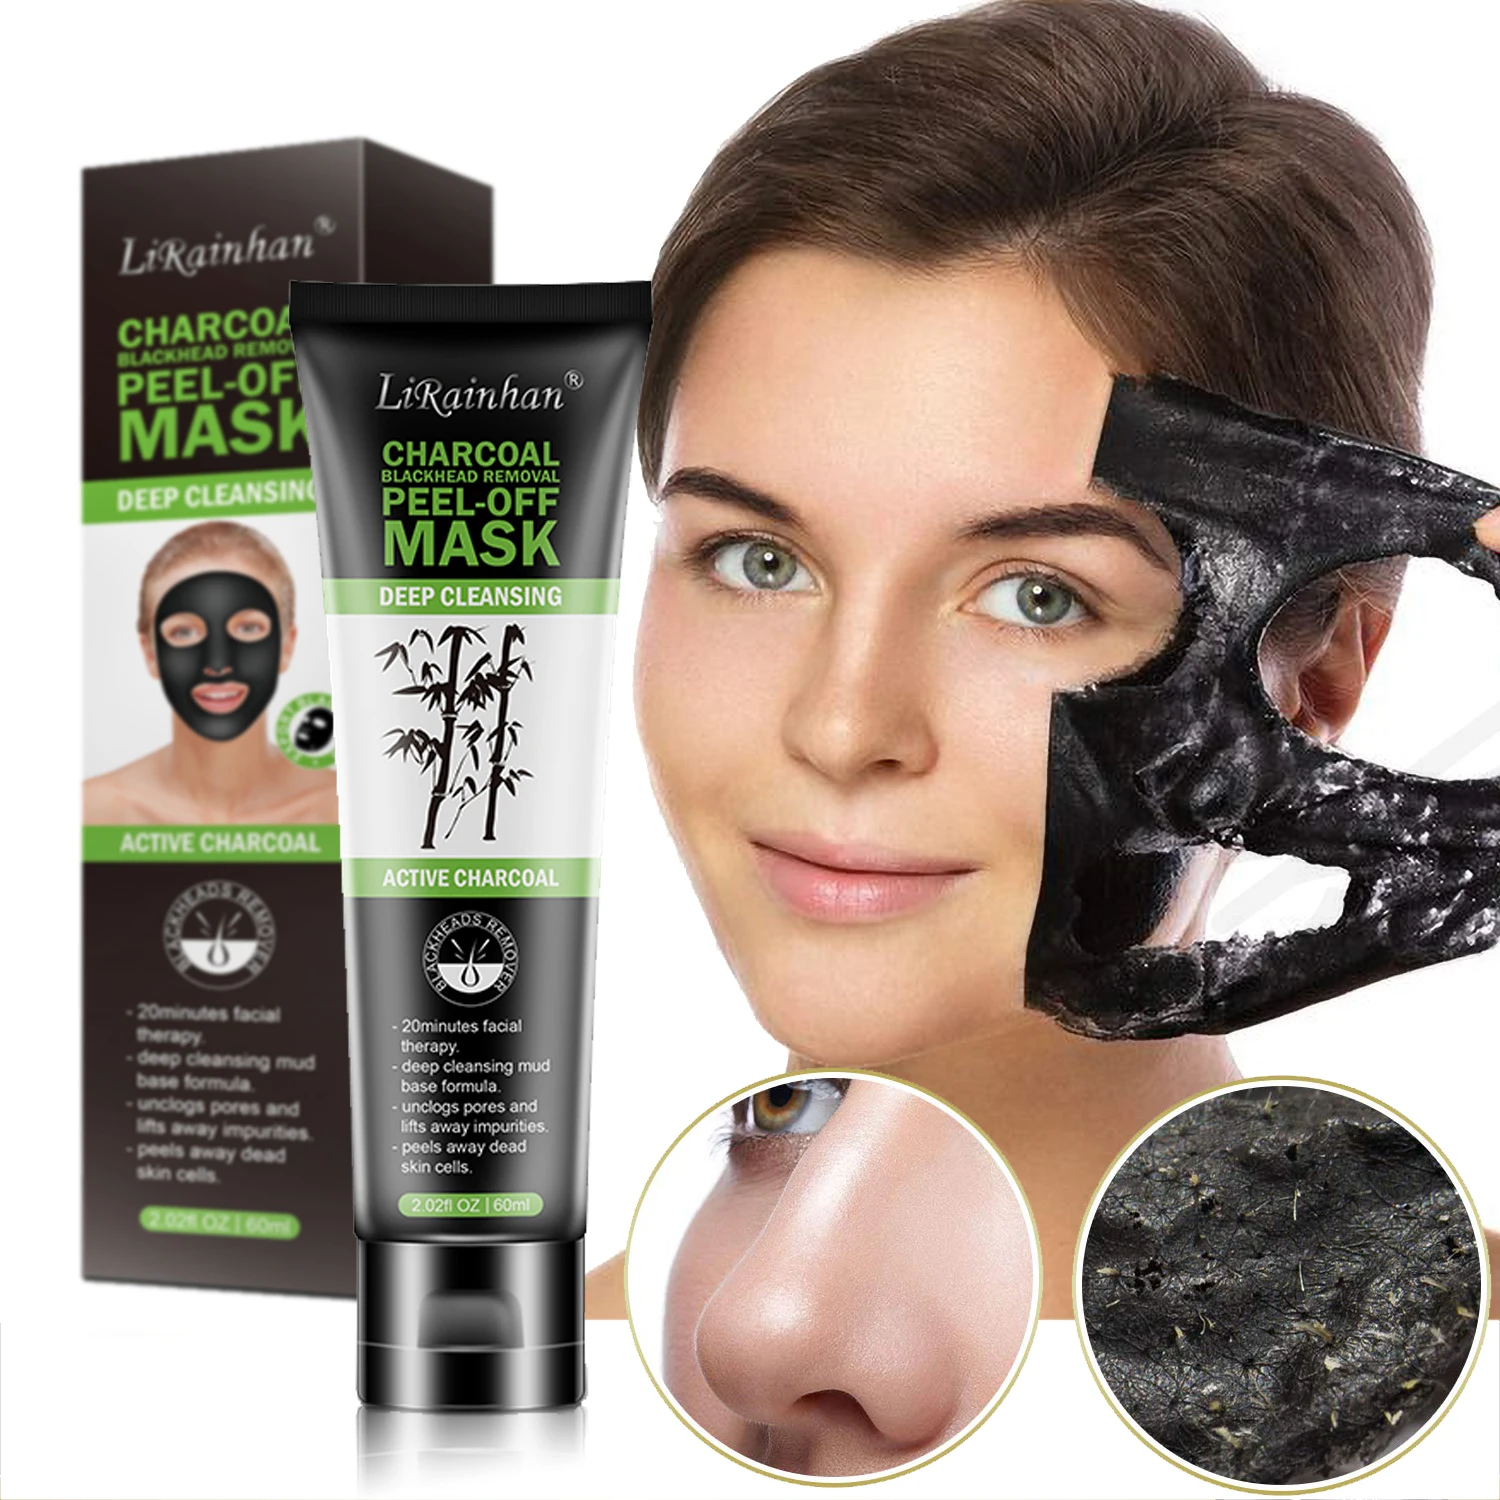 

New Product Deep Cleansing Blackhead Remove Black Pore Cleaner Facial Peel-off Mask